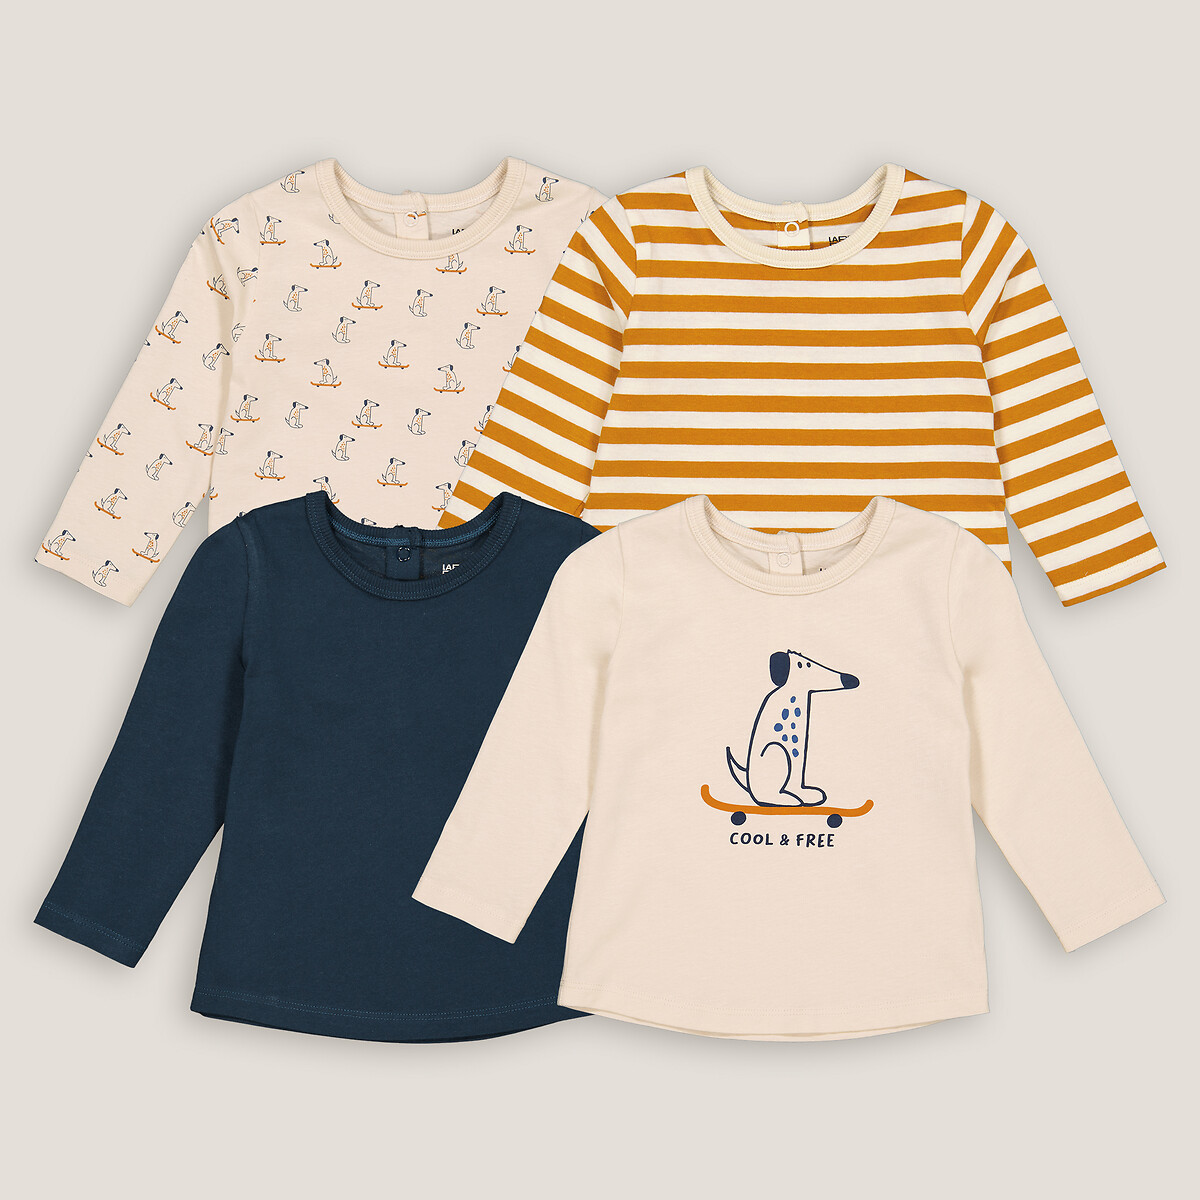 Pack of 4 T-Shirts in Cotton with Crew Neck and Long Sleeves